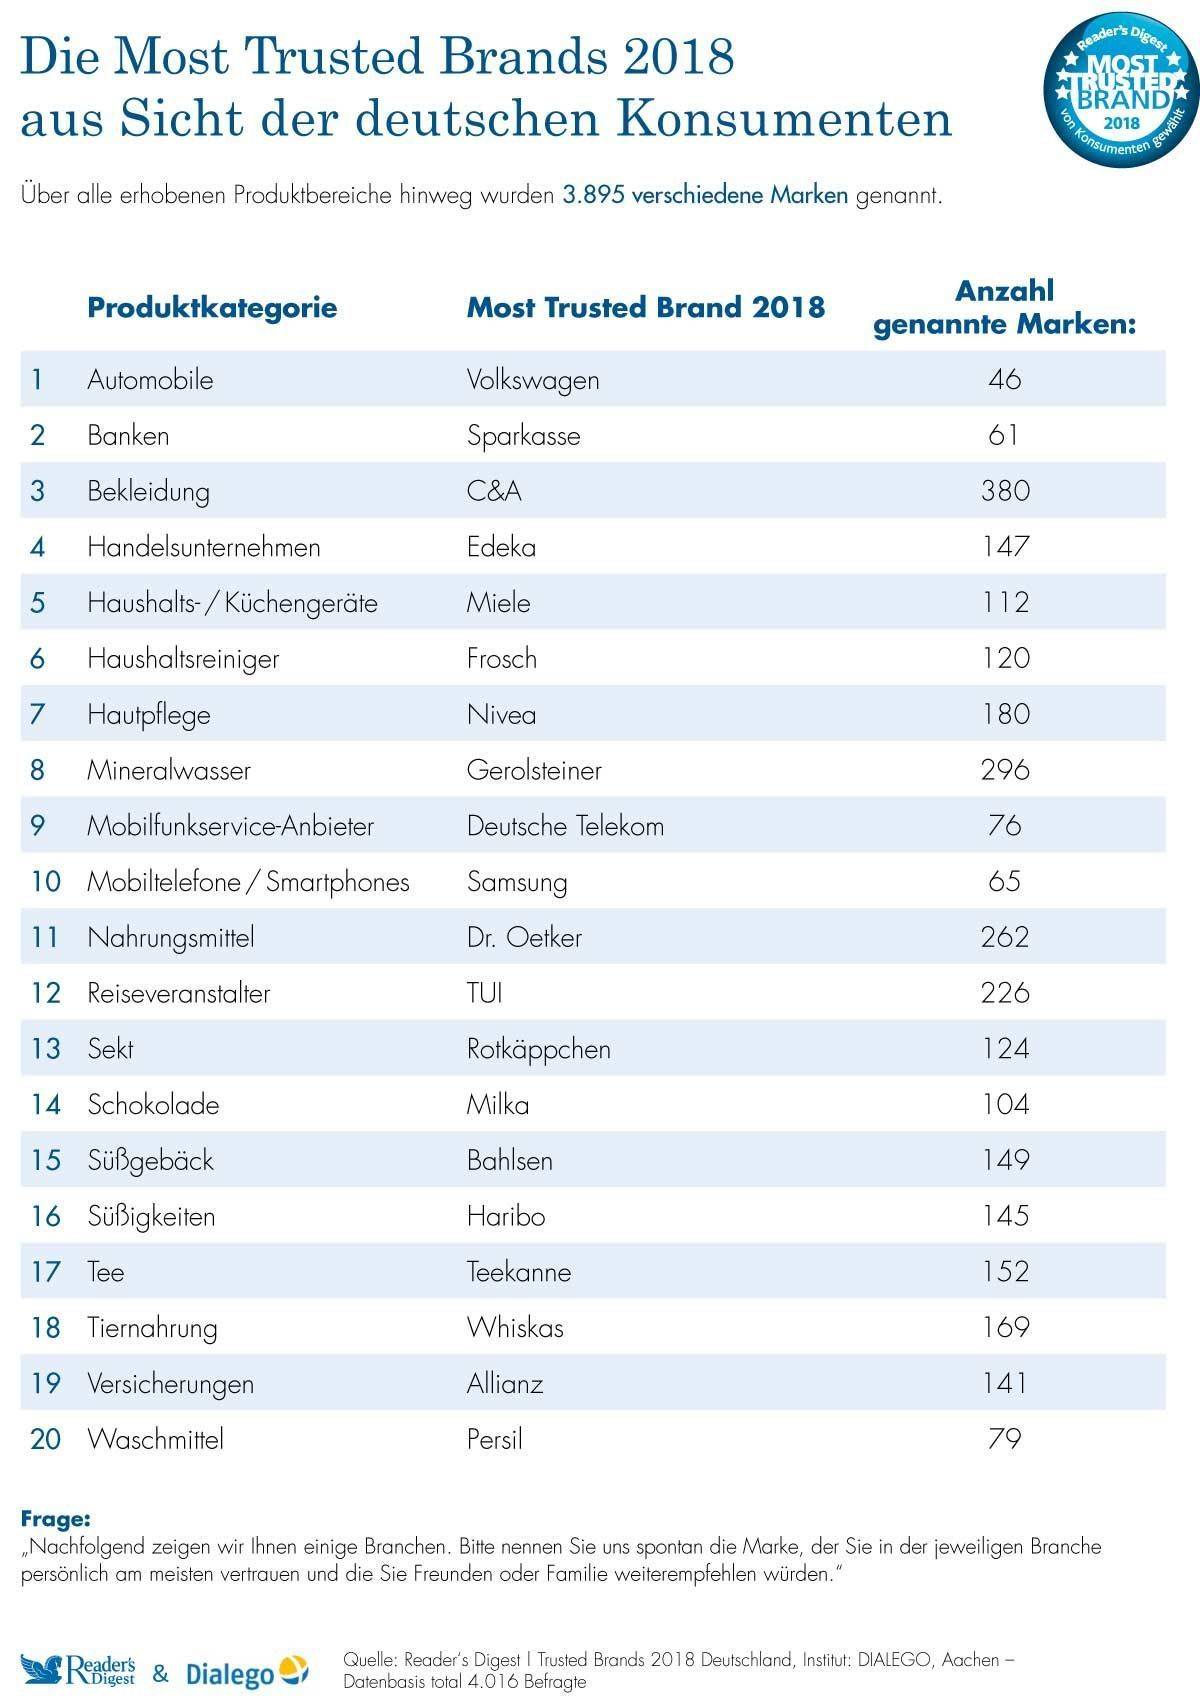 Die Most Trusted Brands 2018.